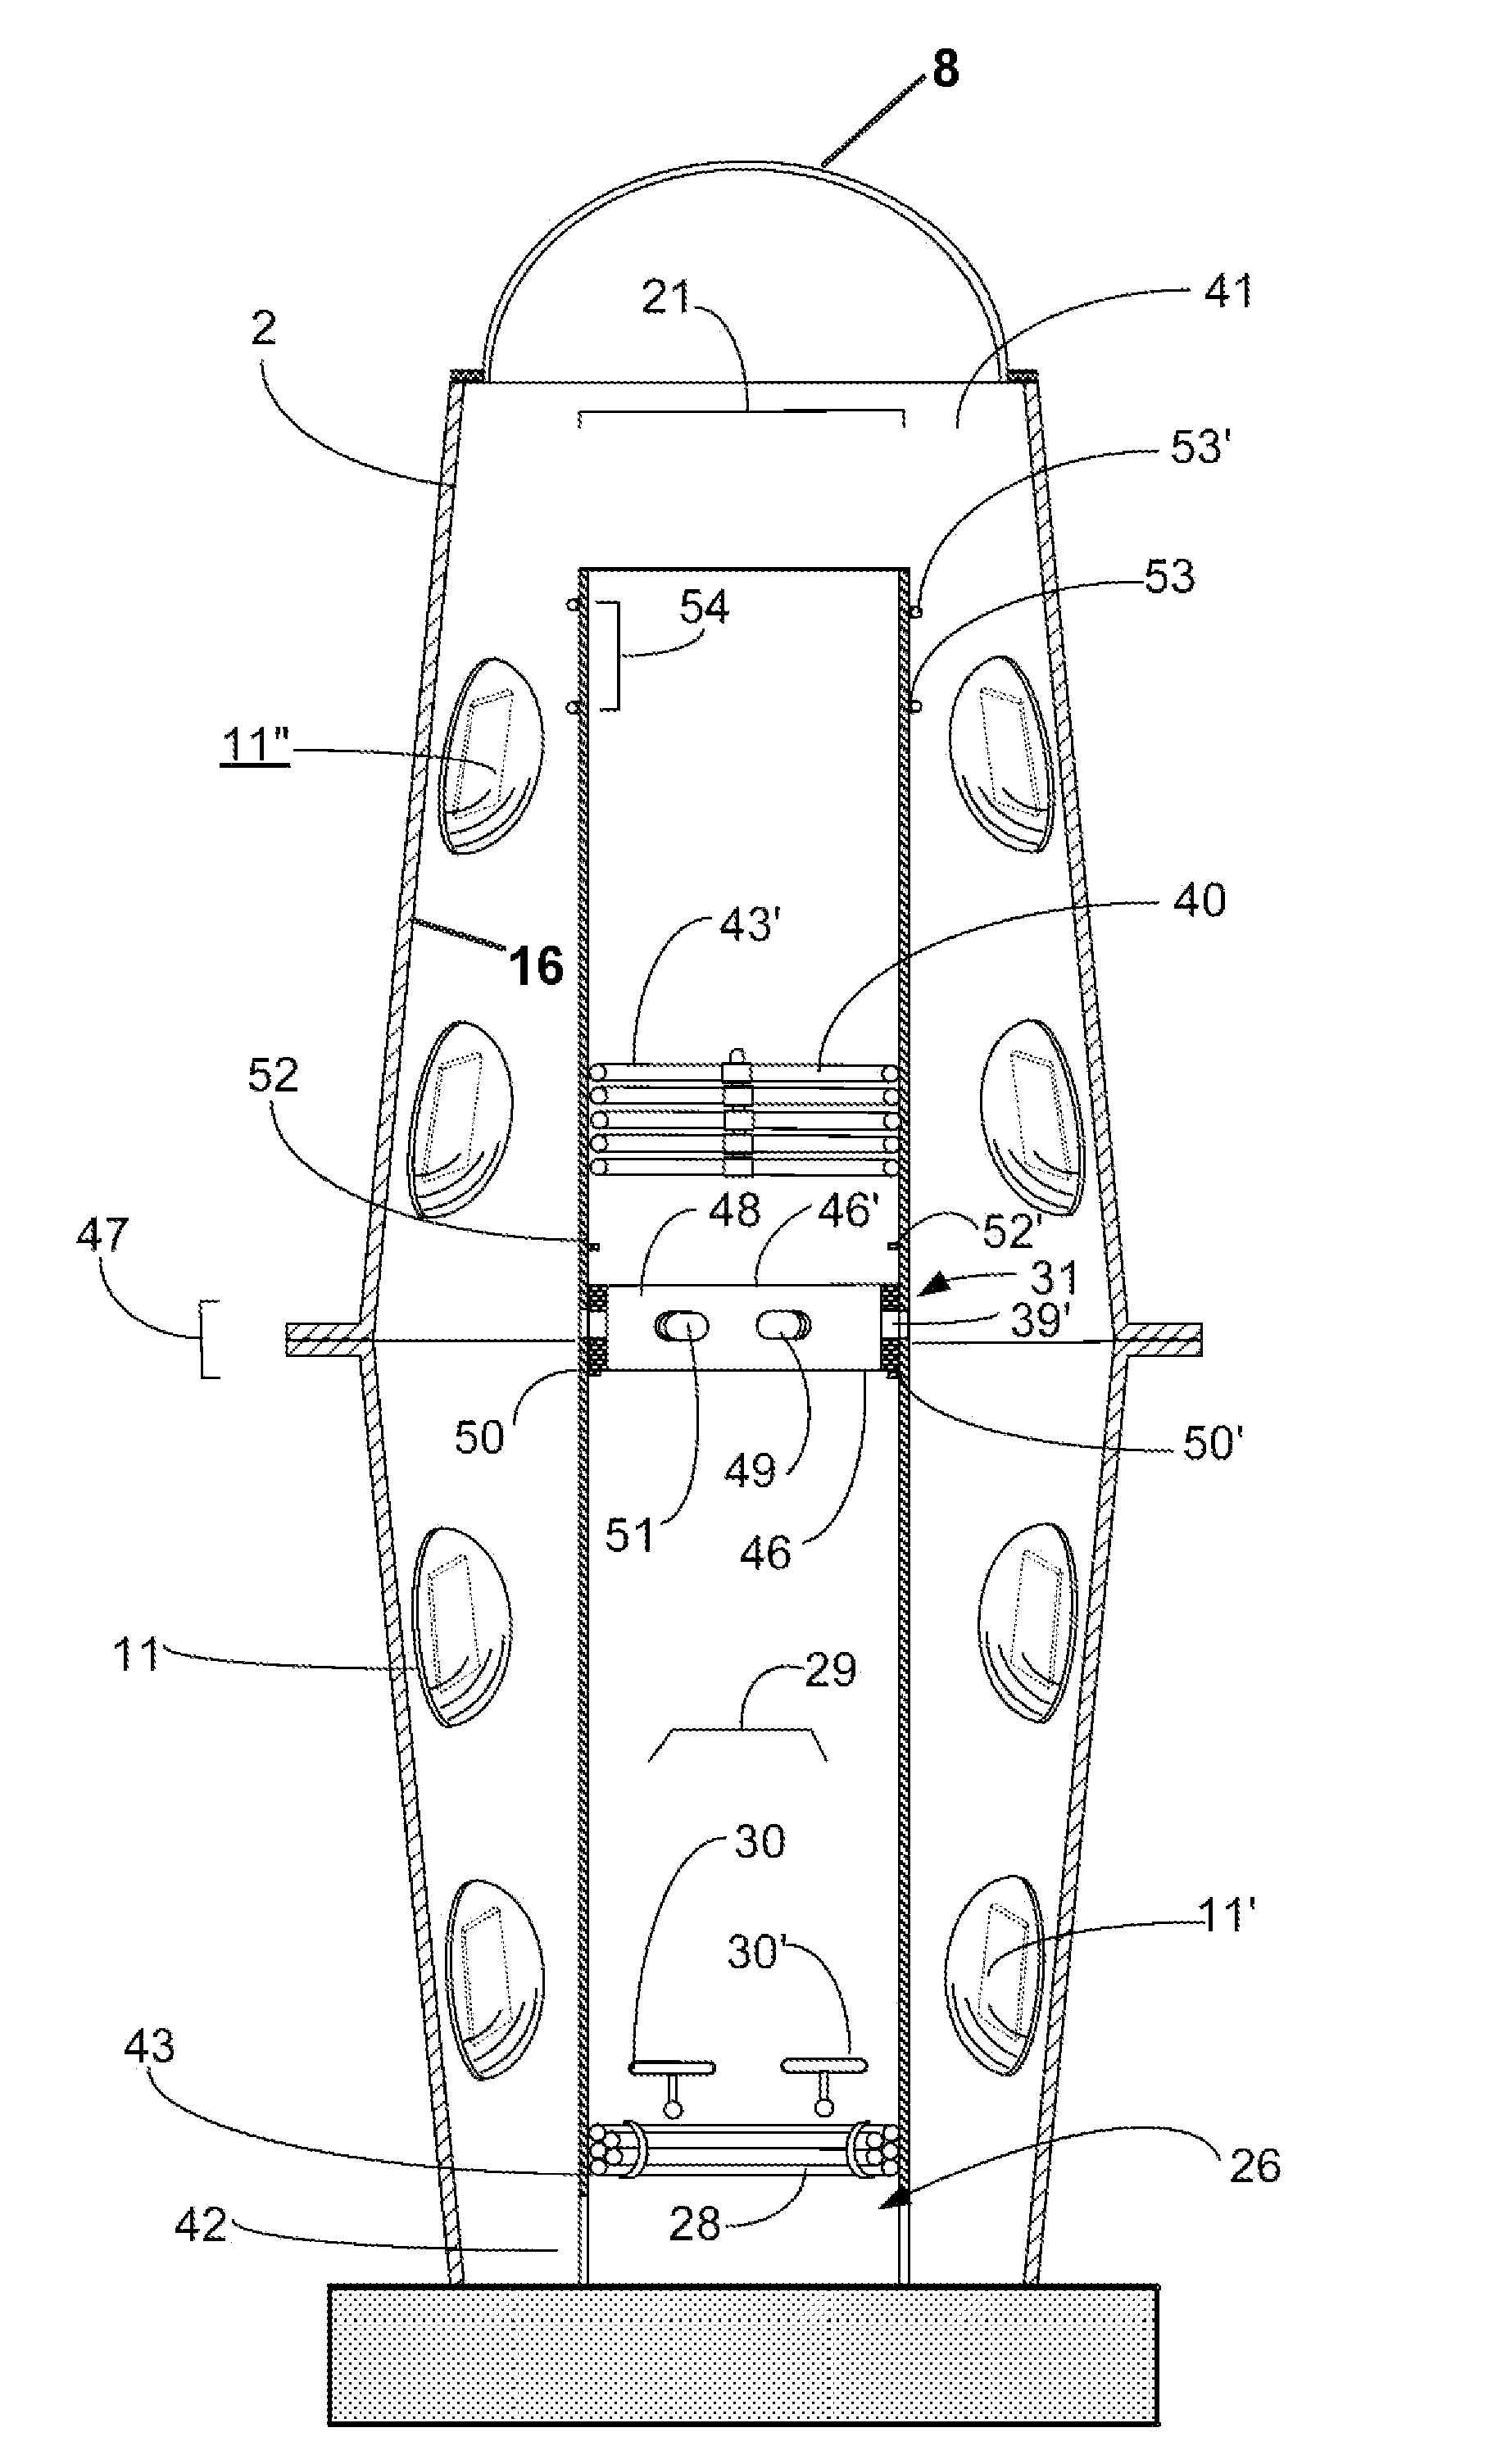 Enclosed bioreactor system and methods associated therewith